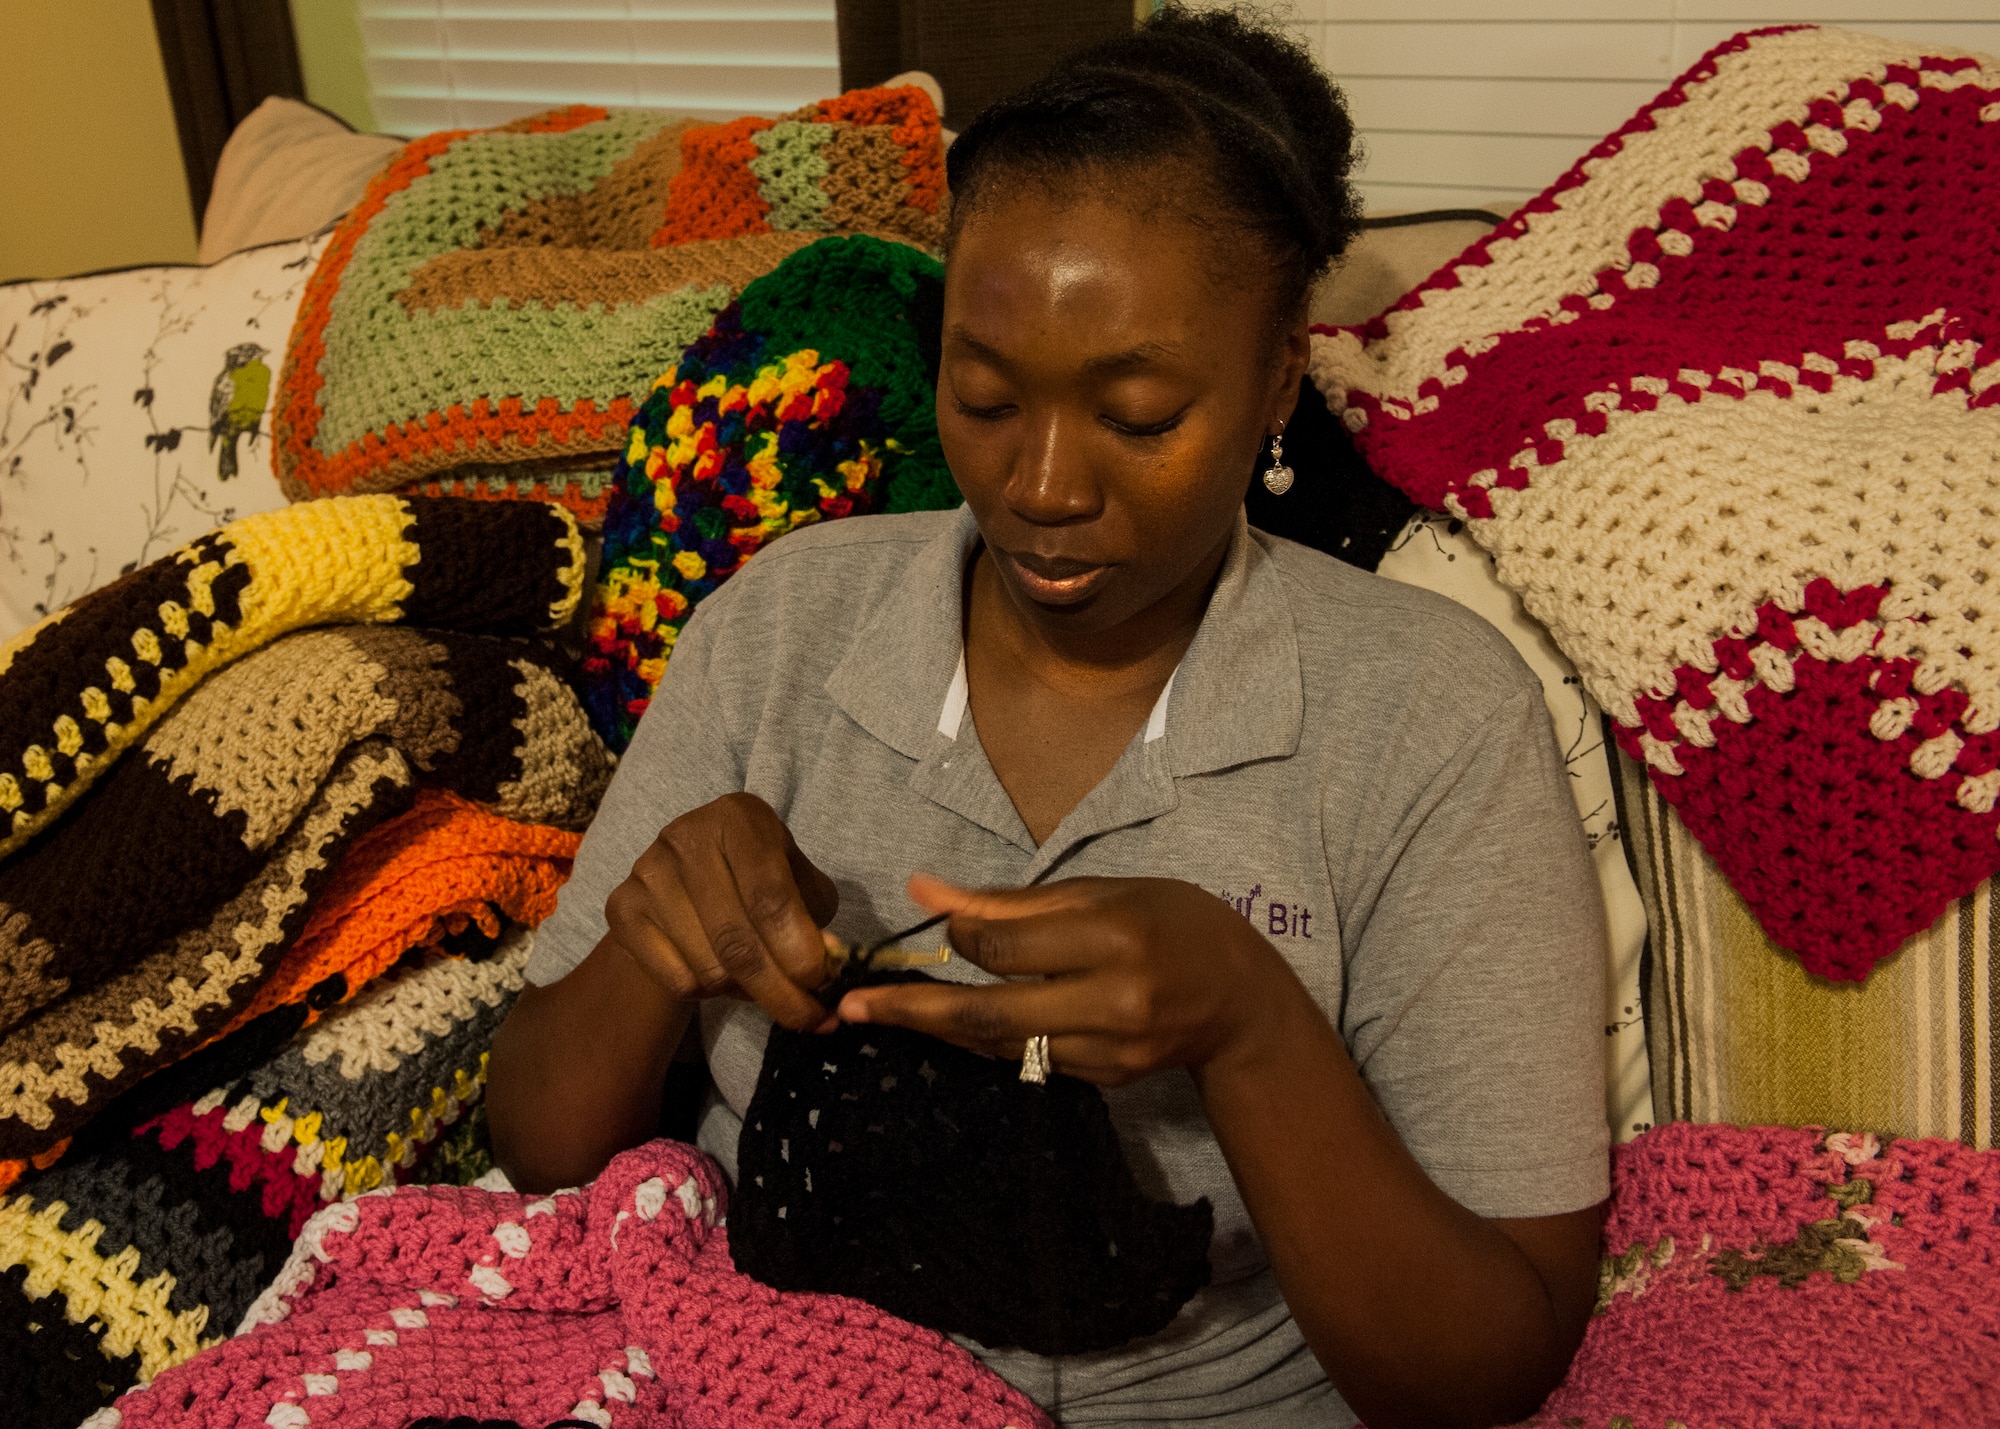 Master Sgt. Candace Ruth, with the 53rd Wing, crochets a blanket June 10 near Eglin Air Force Base, Fla.  Ruth knits to support her husband, Tech. Sgt. Antonio Ruth's, cause.  Ruth, the 33rd Fighter Wing, formed an organization to honor his late mother, and to continue her  legacy of caring and giving.  A “Tiny” Bit of Love provides handmade blankets to cancer patients. (U.S. Air Force photo/Ilka Cole)